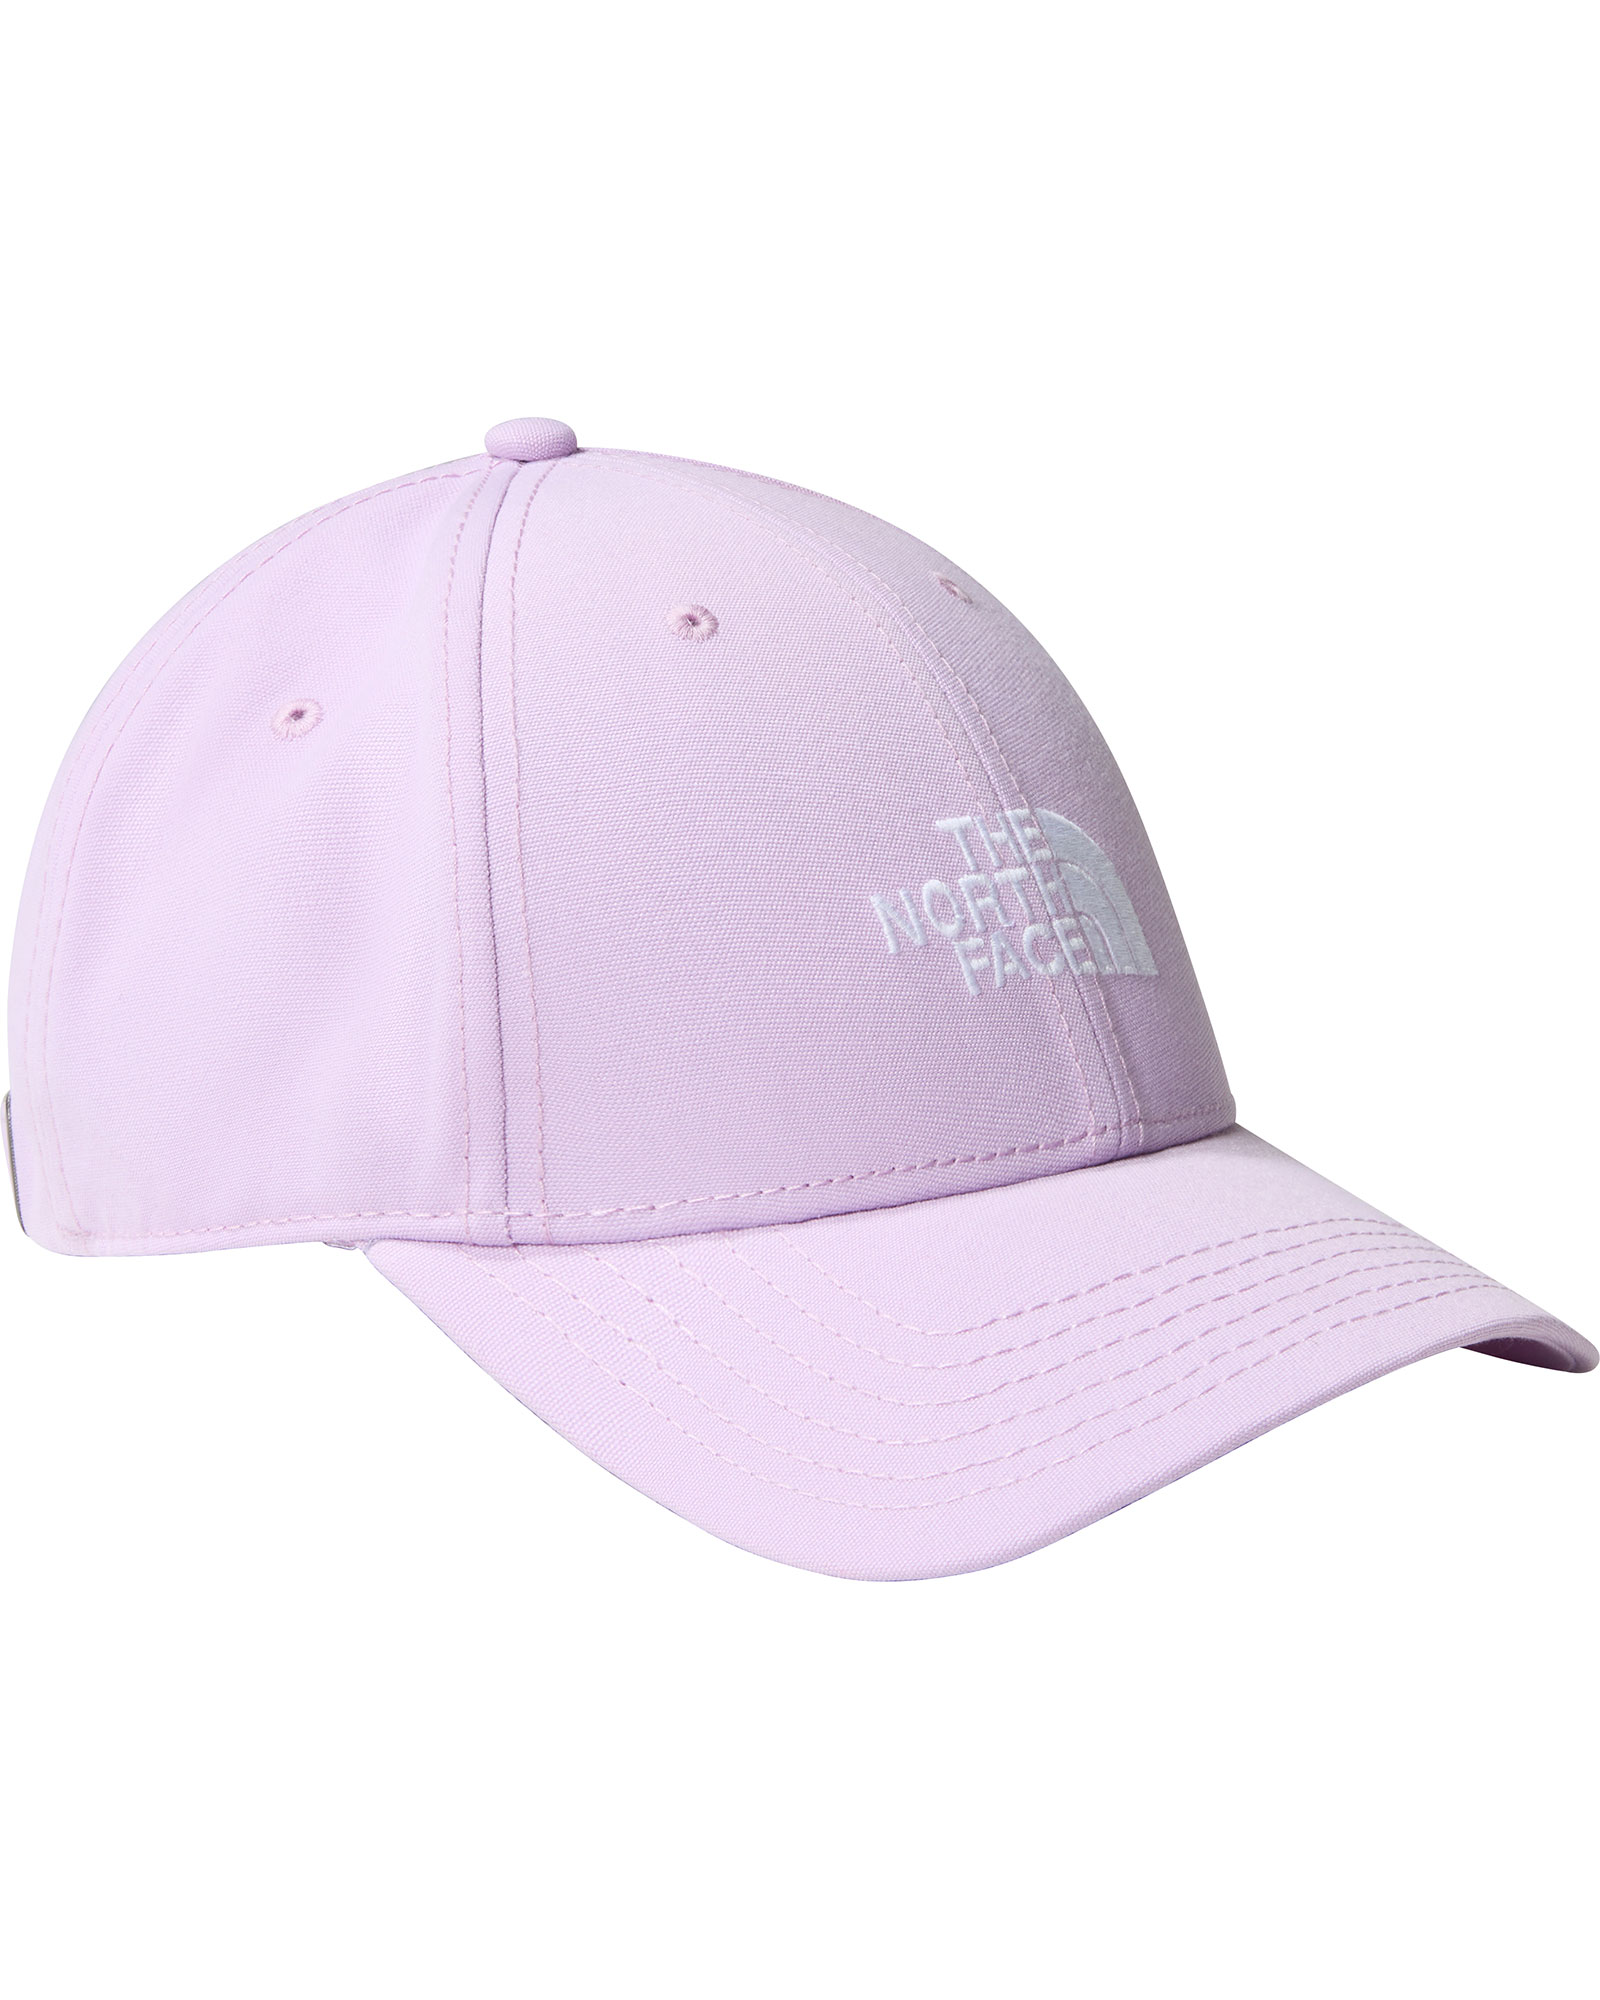 The North Face 66 Classic Logo Hat - Lupine